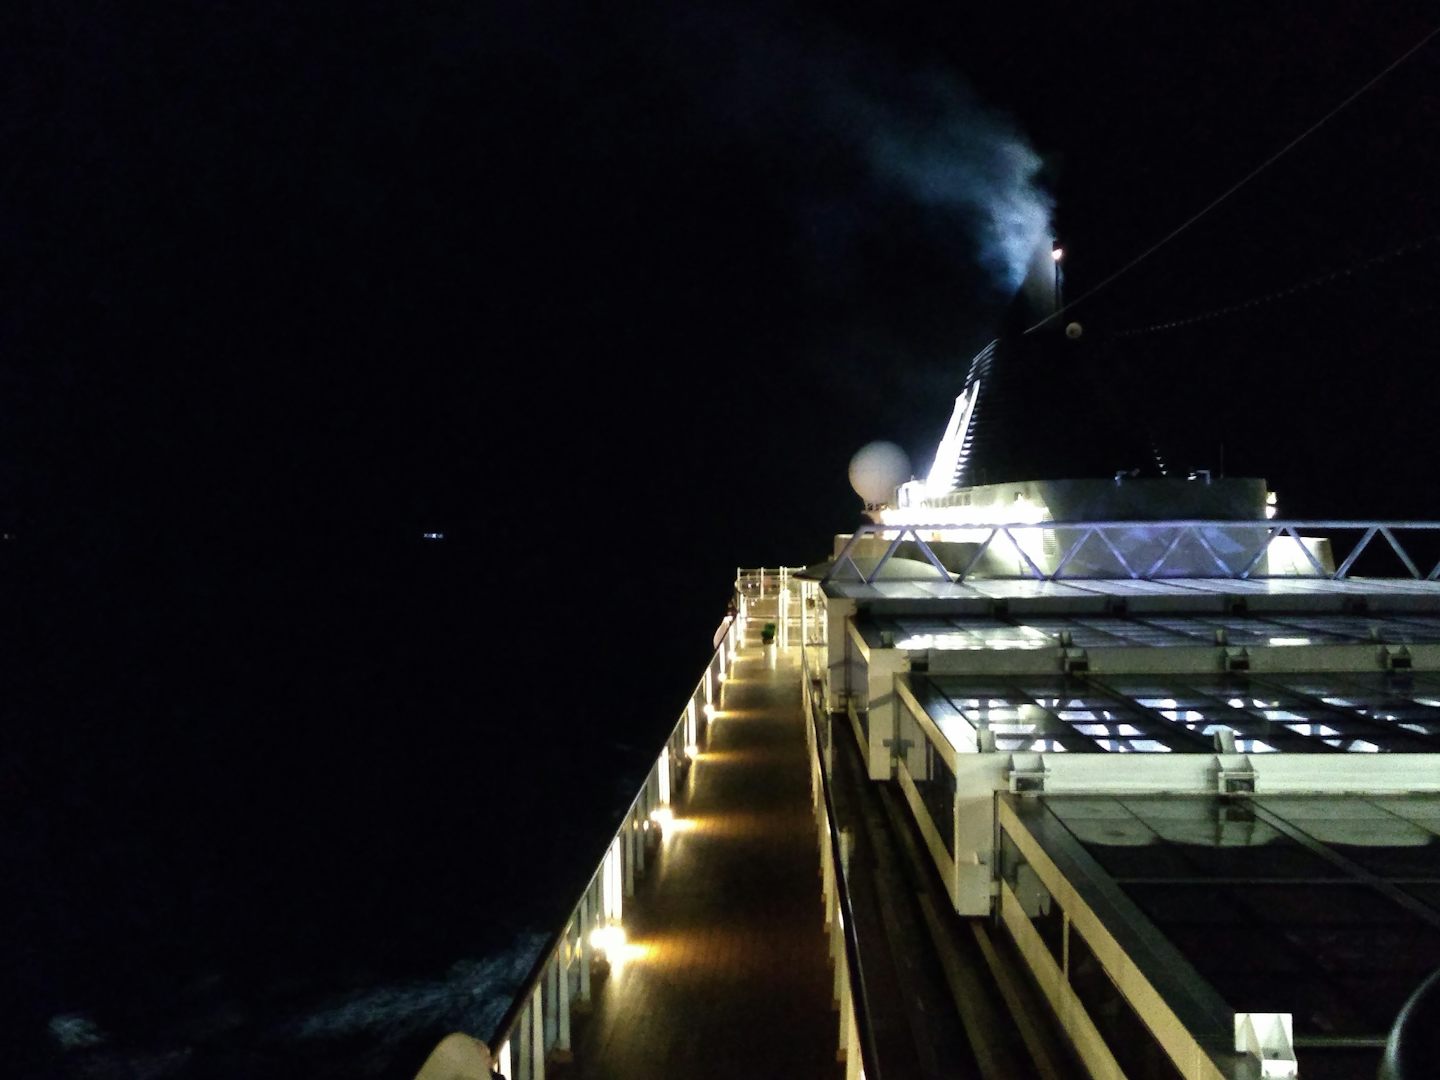 Upper deck at night, passing through the straights of Gibraltar